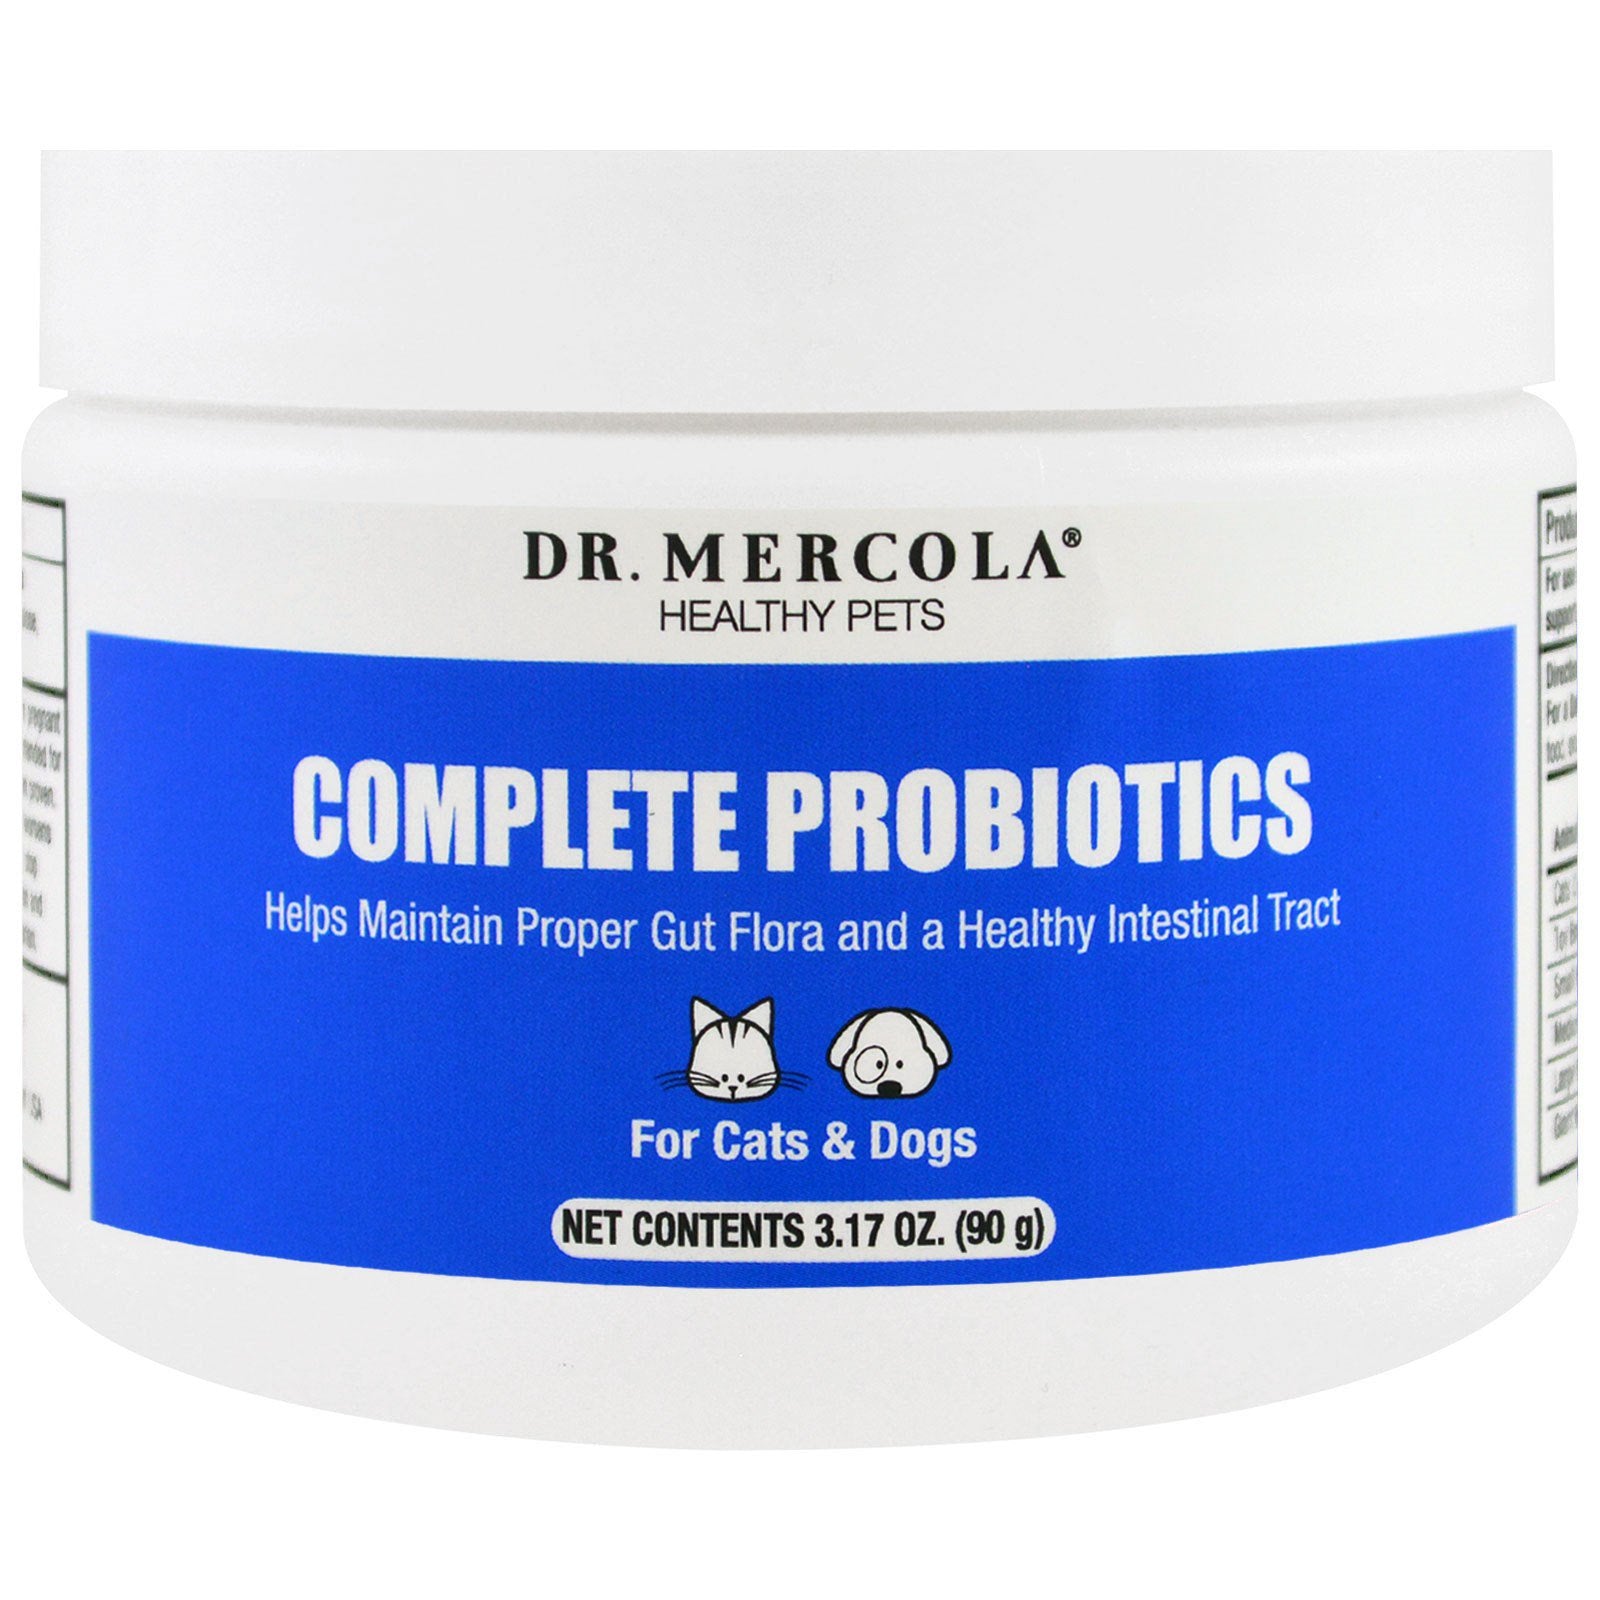 Dr. Mercola, Complete Probiotics, For Cats & Dogs, 3.17 oz (90 g)